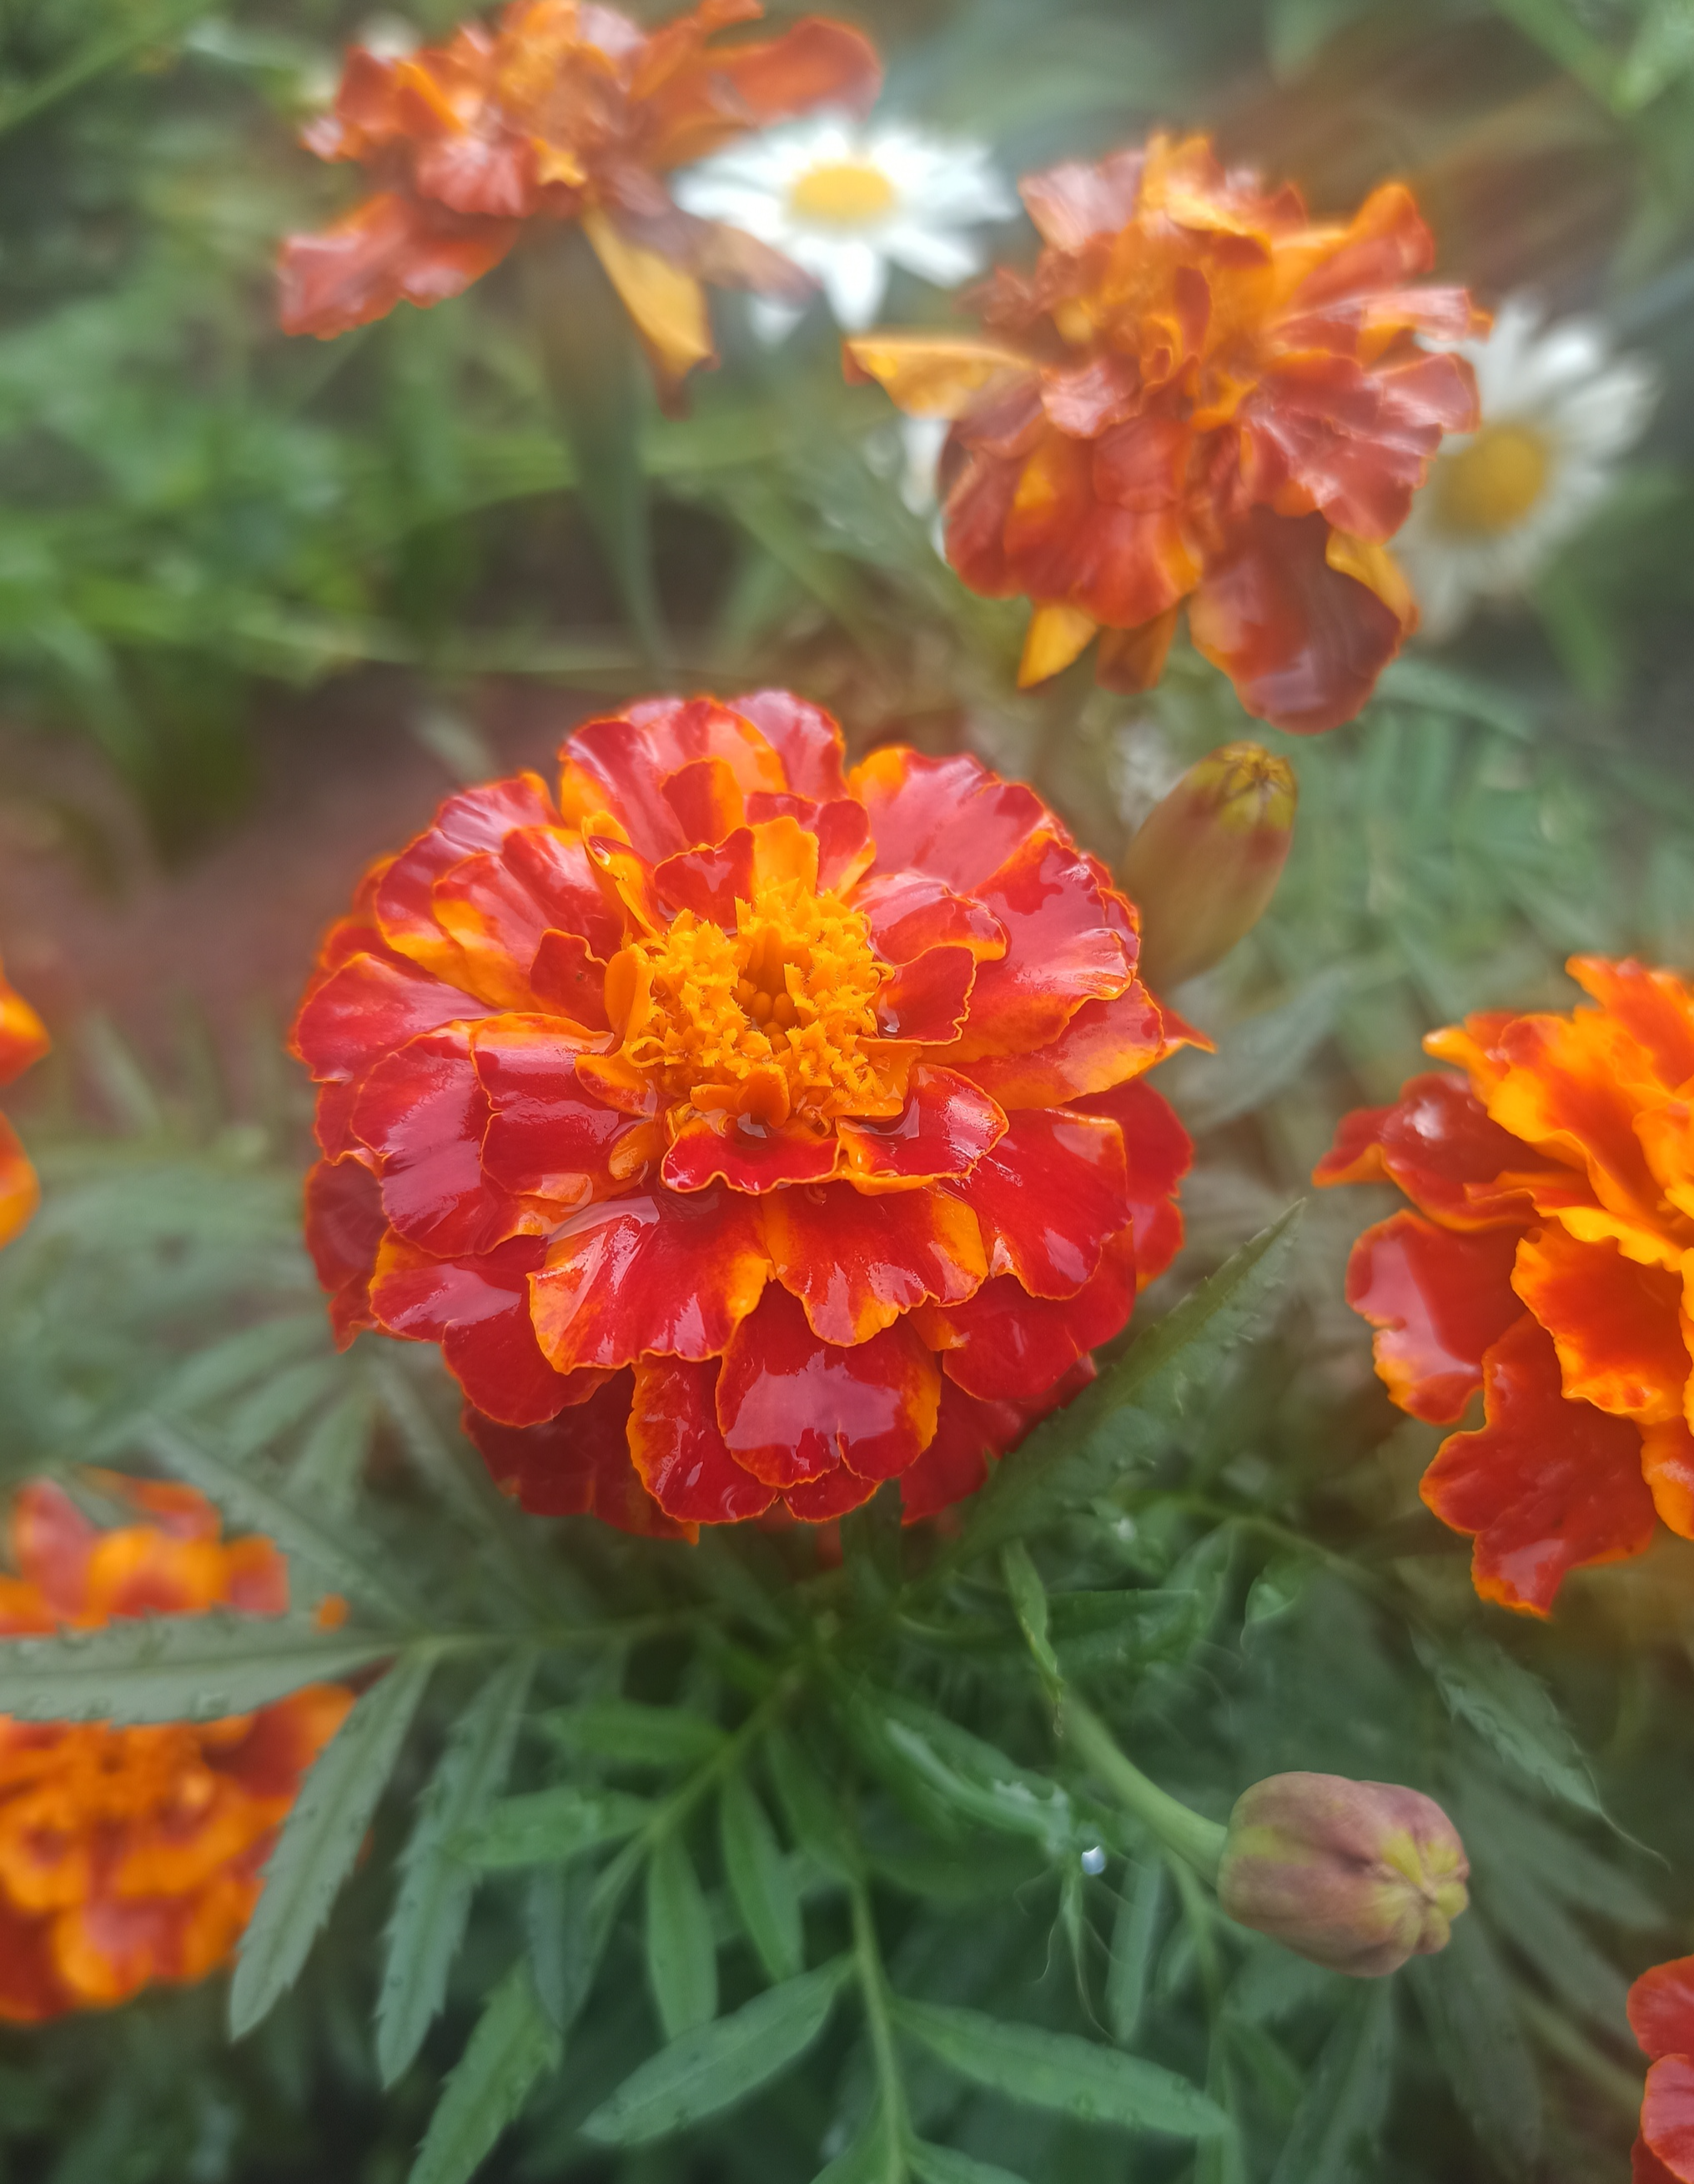 Terry miracle - My, Mobile photography, Images, Summer, Nature, Bloom, Marigolds, Garden